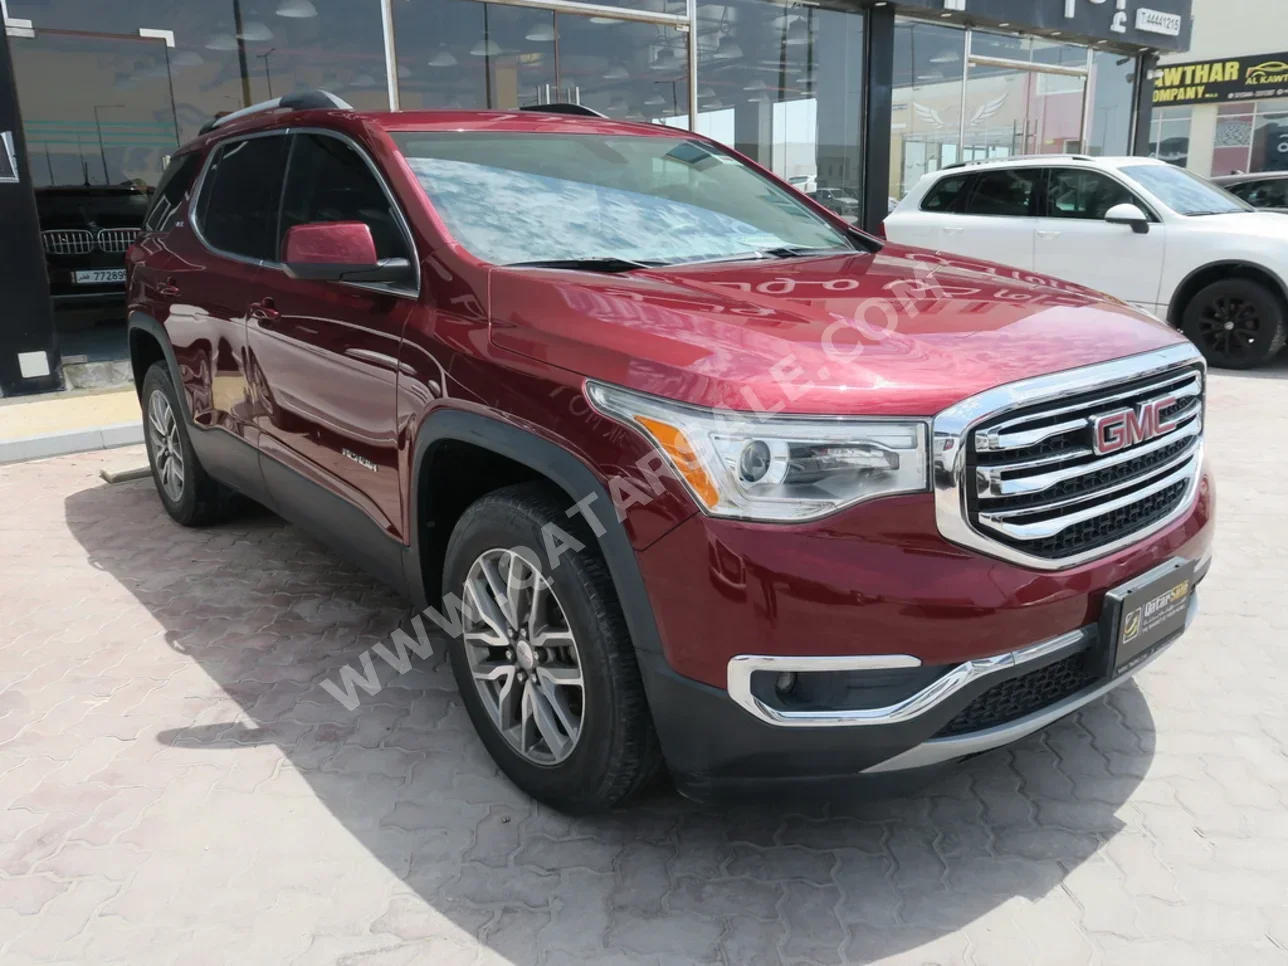 GMC  Acadia  SLE  2017  Automatic  218,000 Km  6 Cylinder  All Wheel Drive (AWD)  SUV  Red